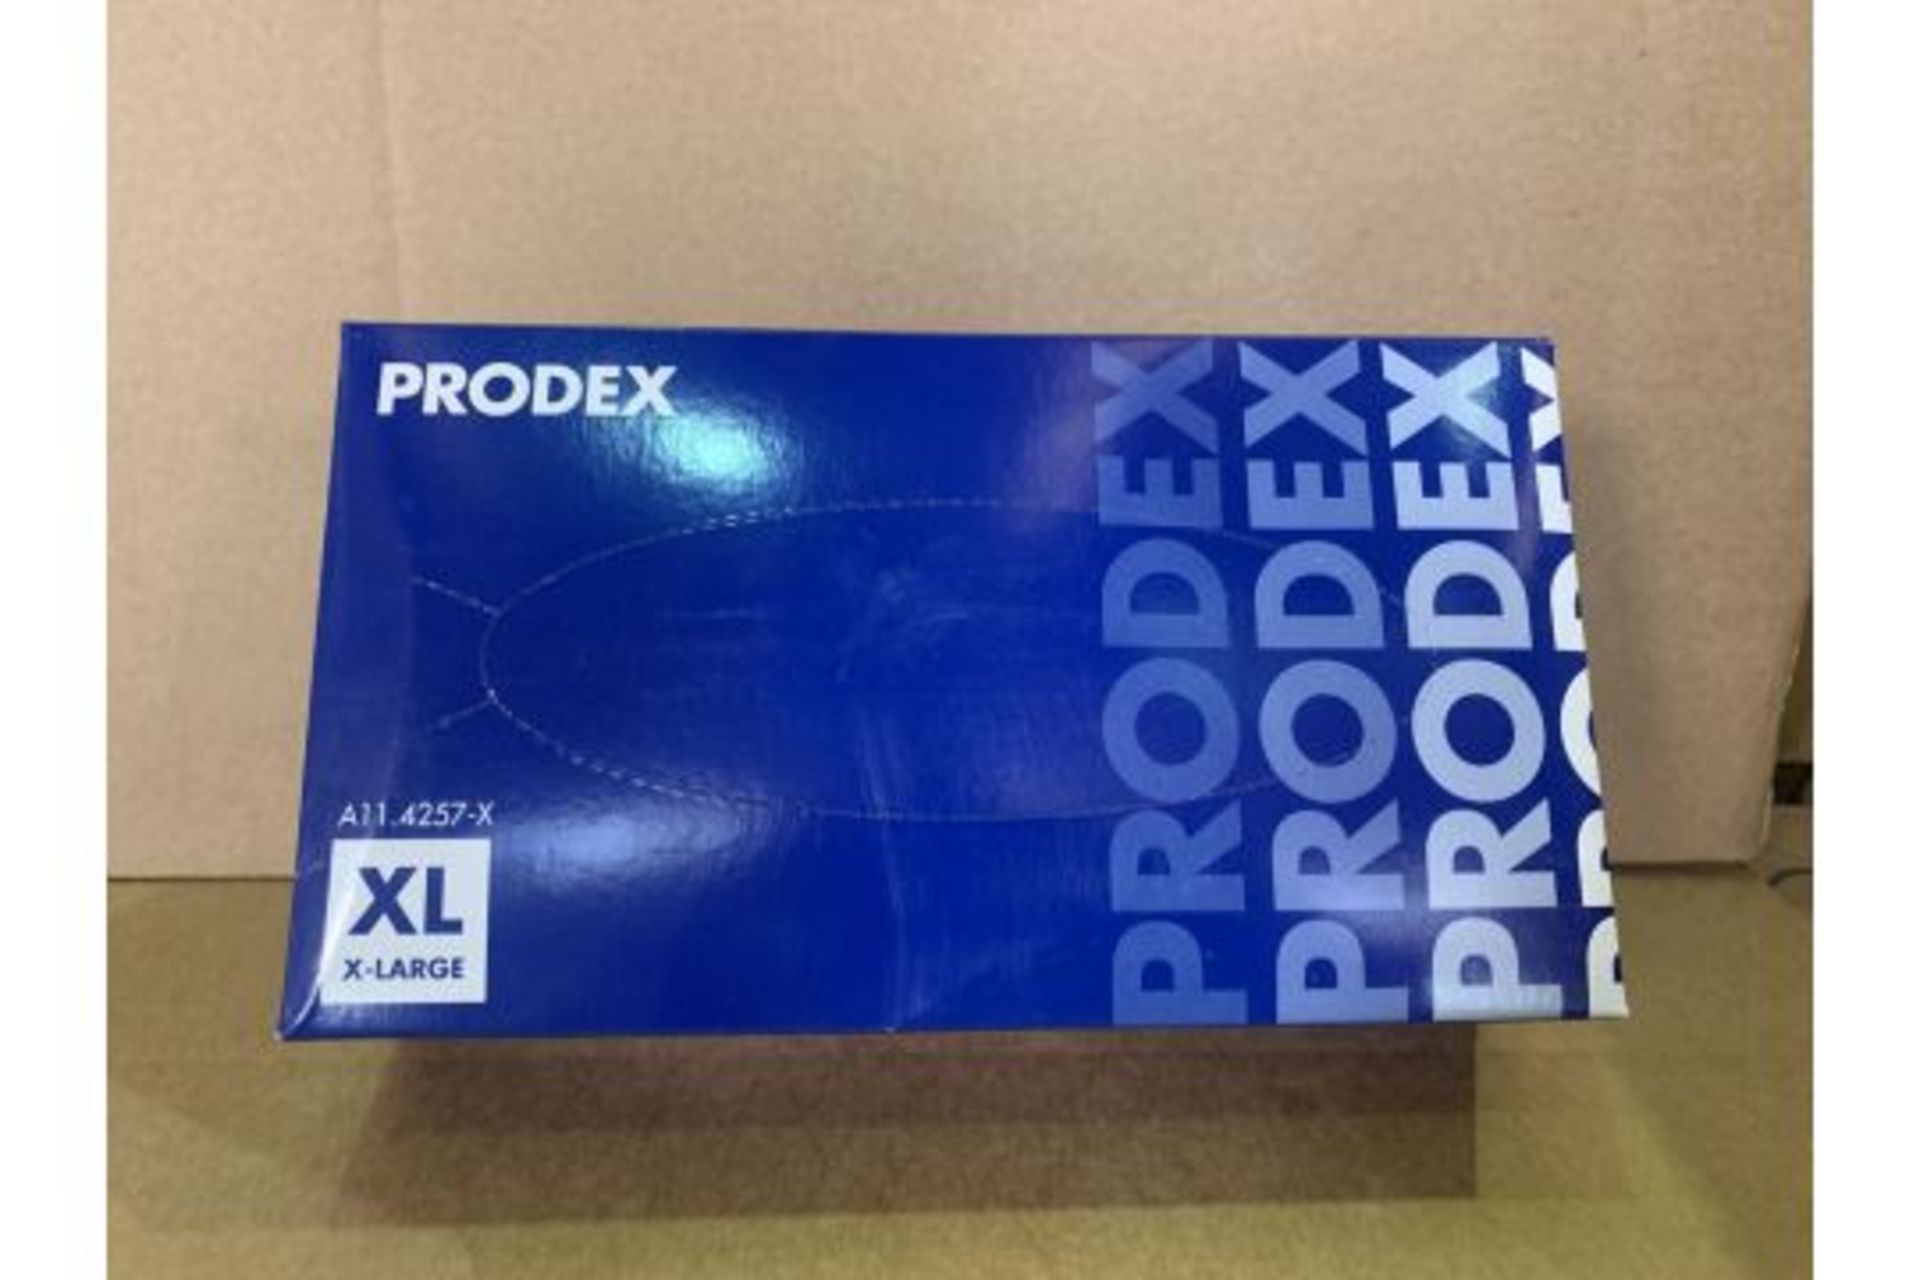 20 X PACKS OF 100 PRODEX VINYL DISPOSABLE GLOVES (SIZES MAY VARY) R15